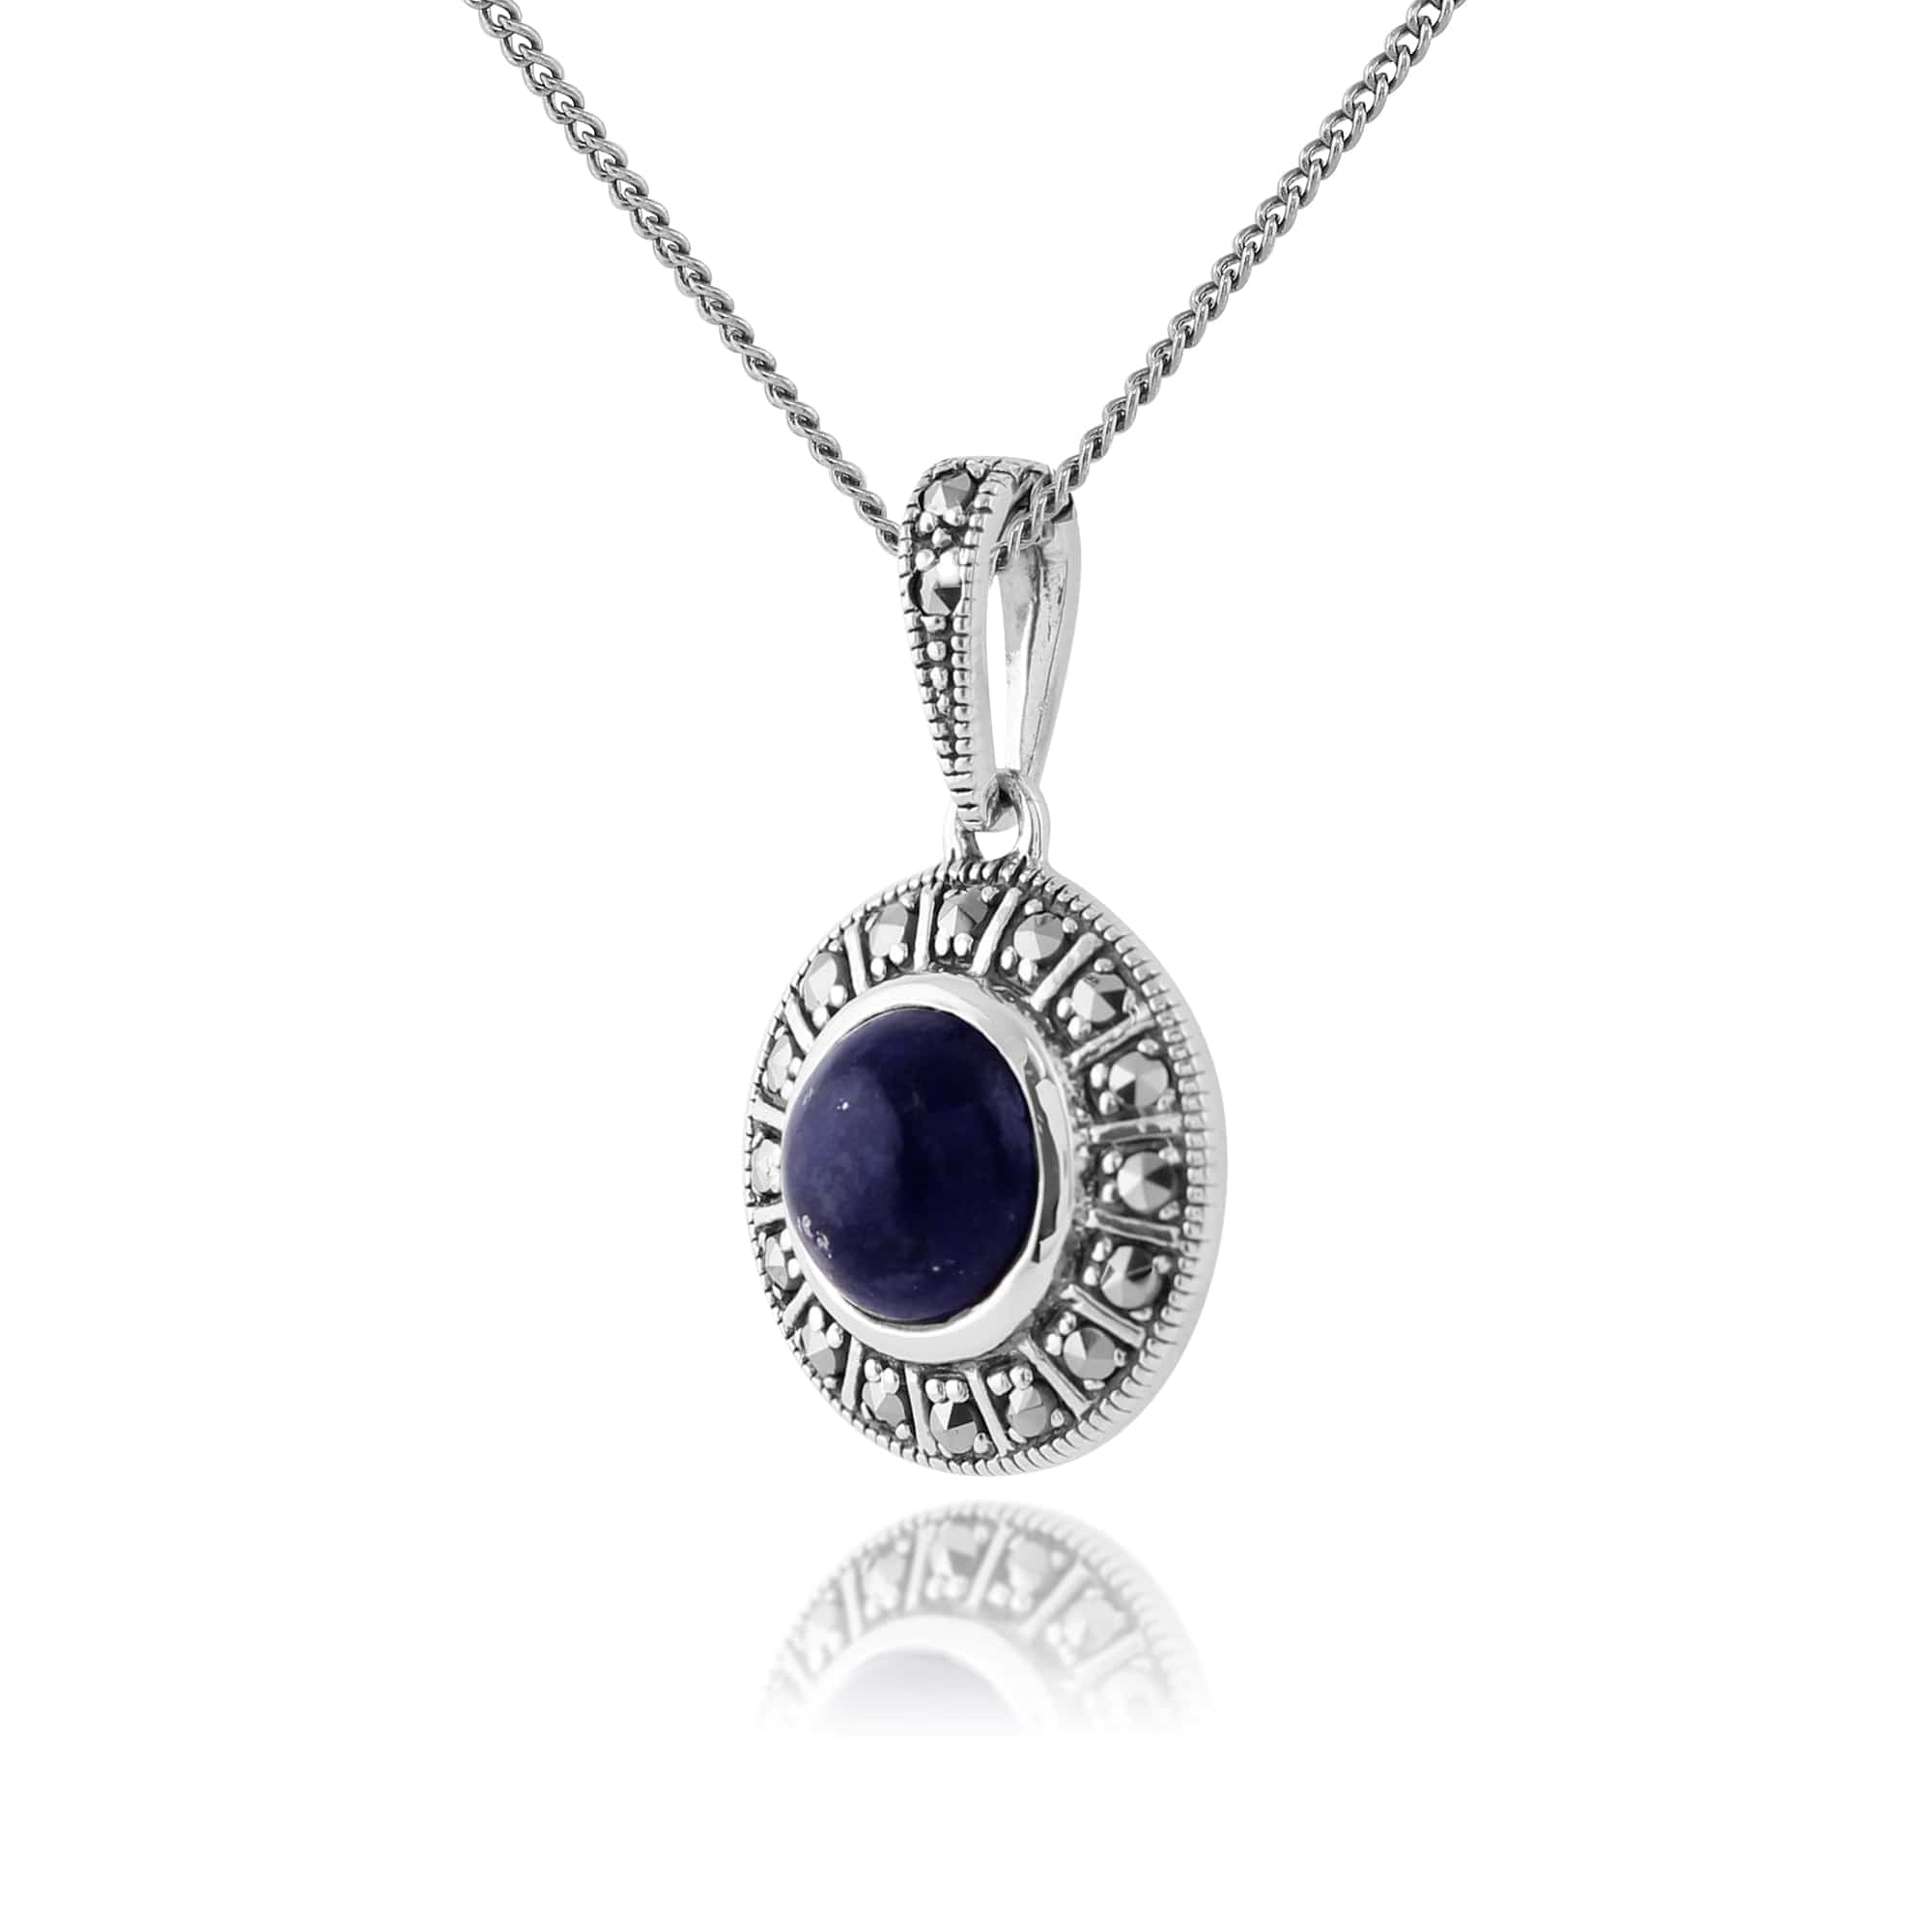 214N646503925 Art Deco Style Round Lapis Lazuli Cabochon & Marcasite Pendant in 925 Sterling Silver 2